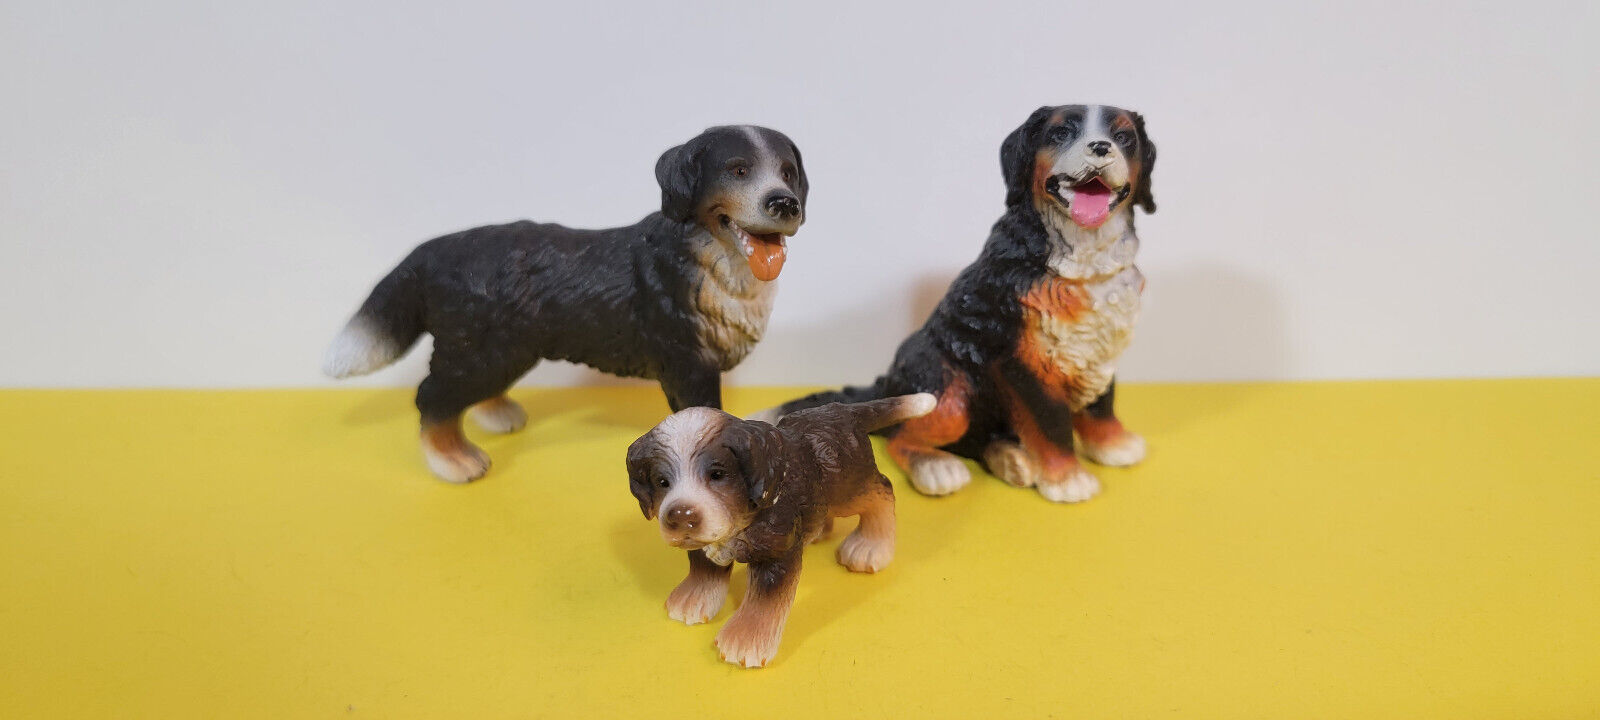 Schleich Lot of 3 Bernese Mountain Dog Family Figurine 16316 16339 16344